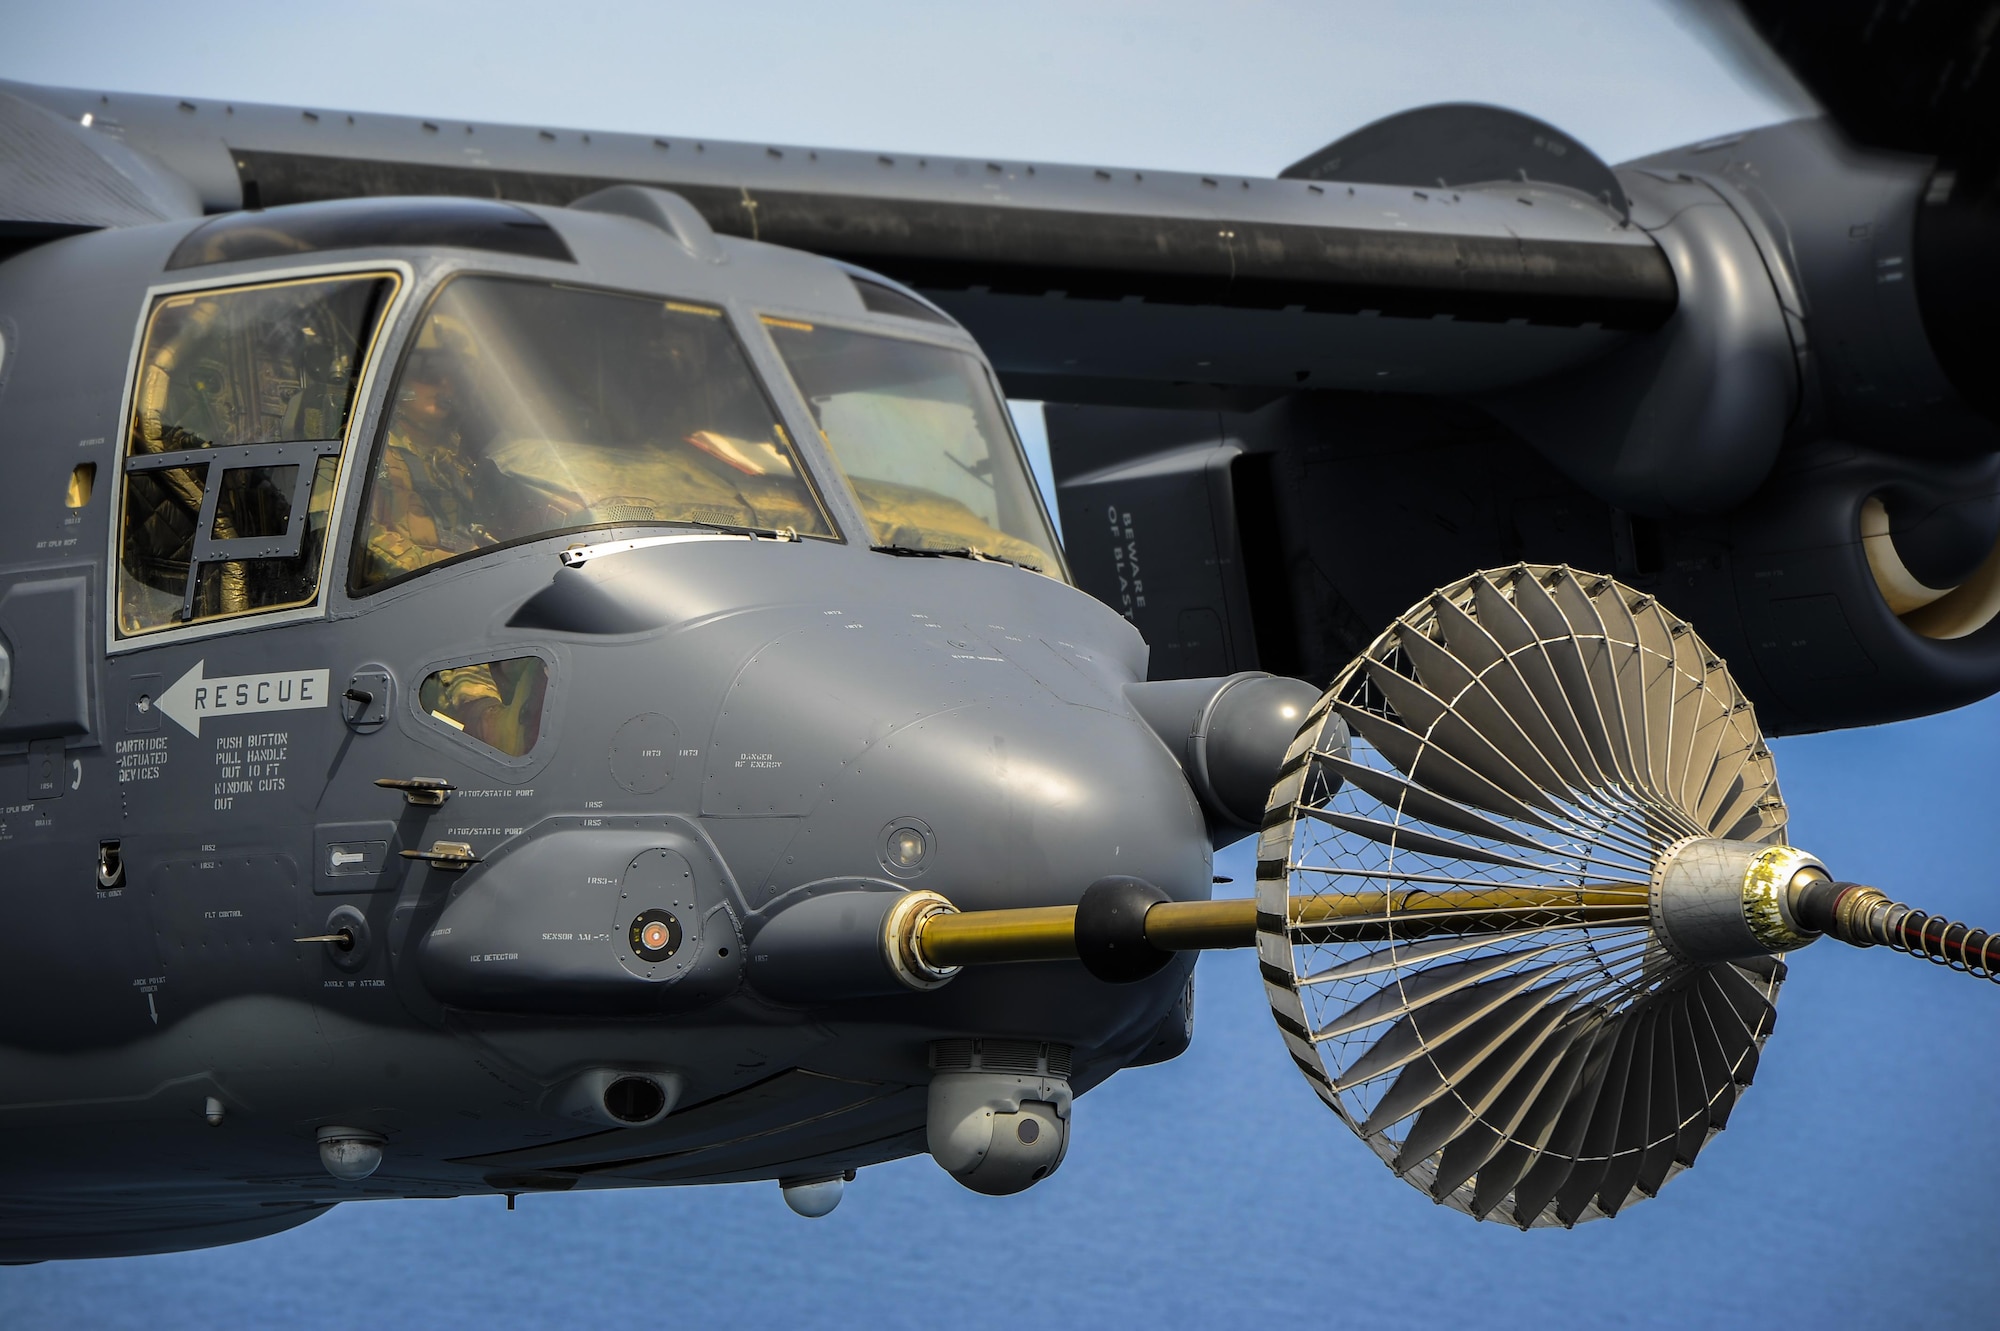 A CV-22 Osprey connects to an MC-130H Combat Talon II air-refueling receptacle during a training mission at Hurlburt Field, Fla., April 24, 2015. The Osprey is a versatile, self-deployable aircraft that offers increased speed and range over other rotary-wing aircraft, enabling Air Force Special Operations Command aircrews to execute long-range special operations missions. (U.S. Air Force photo/Senior Airman Christopher Callaway)